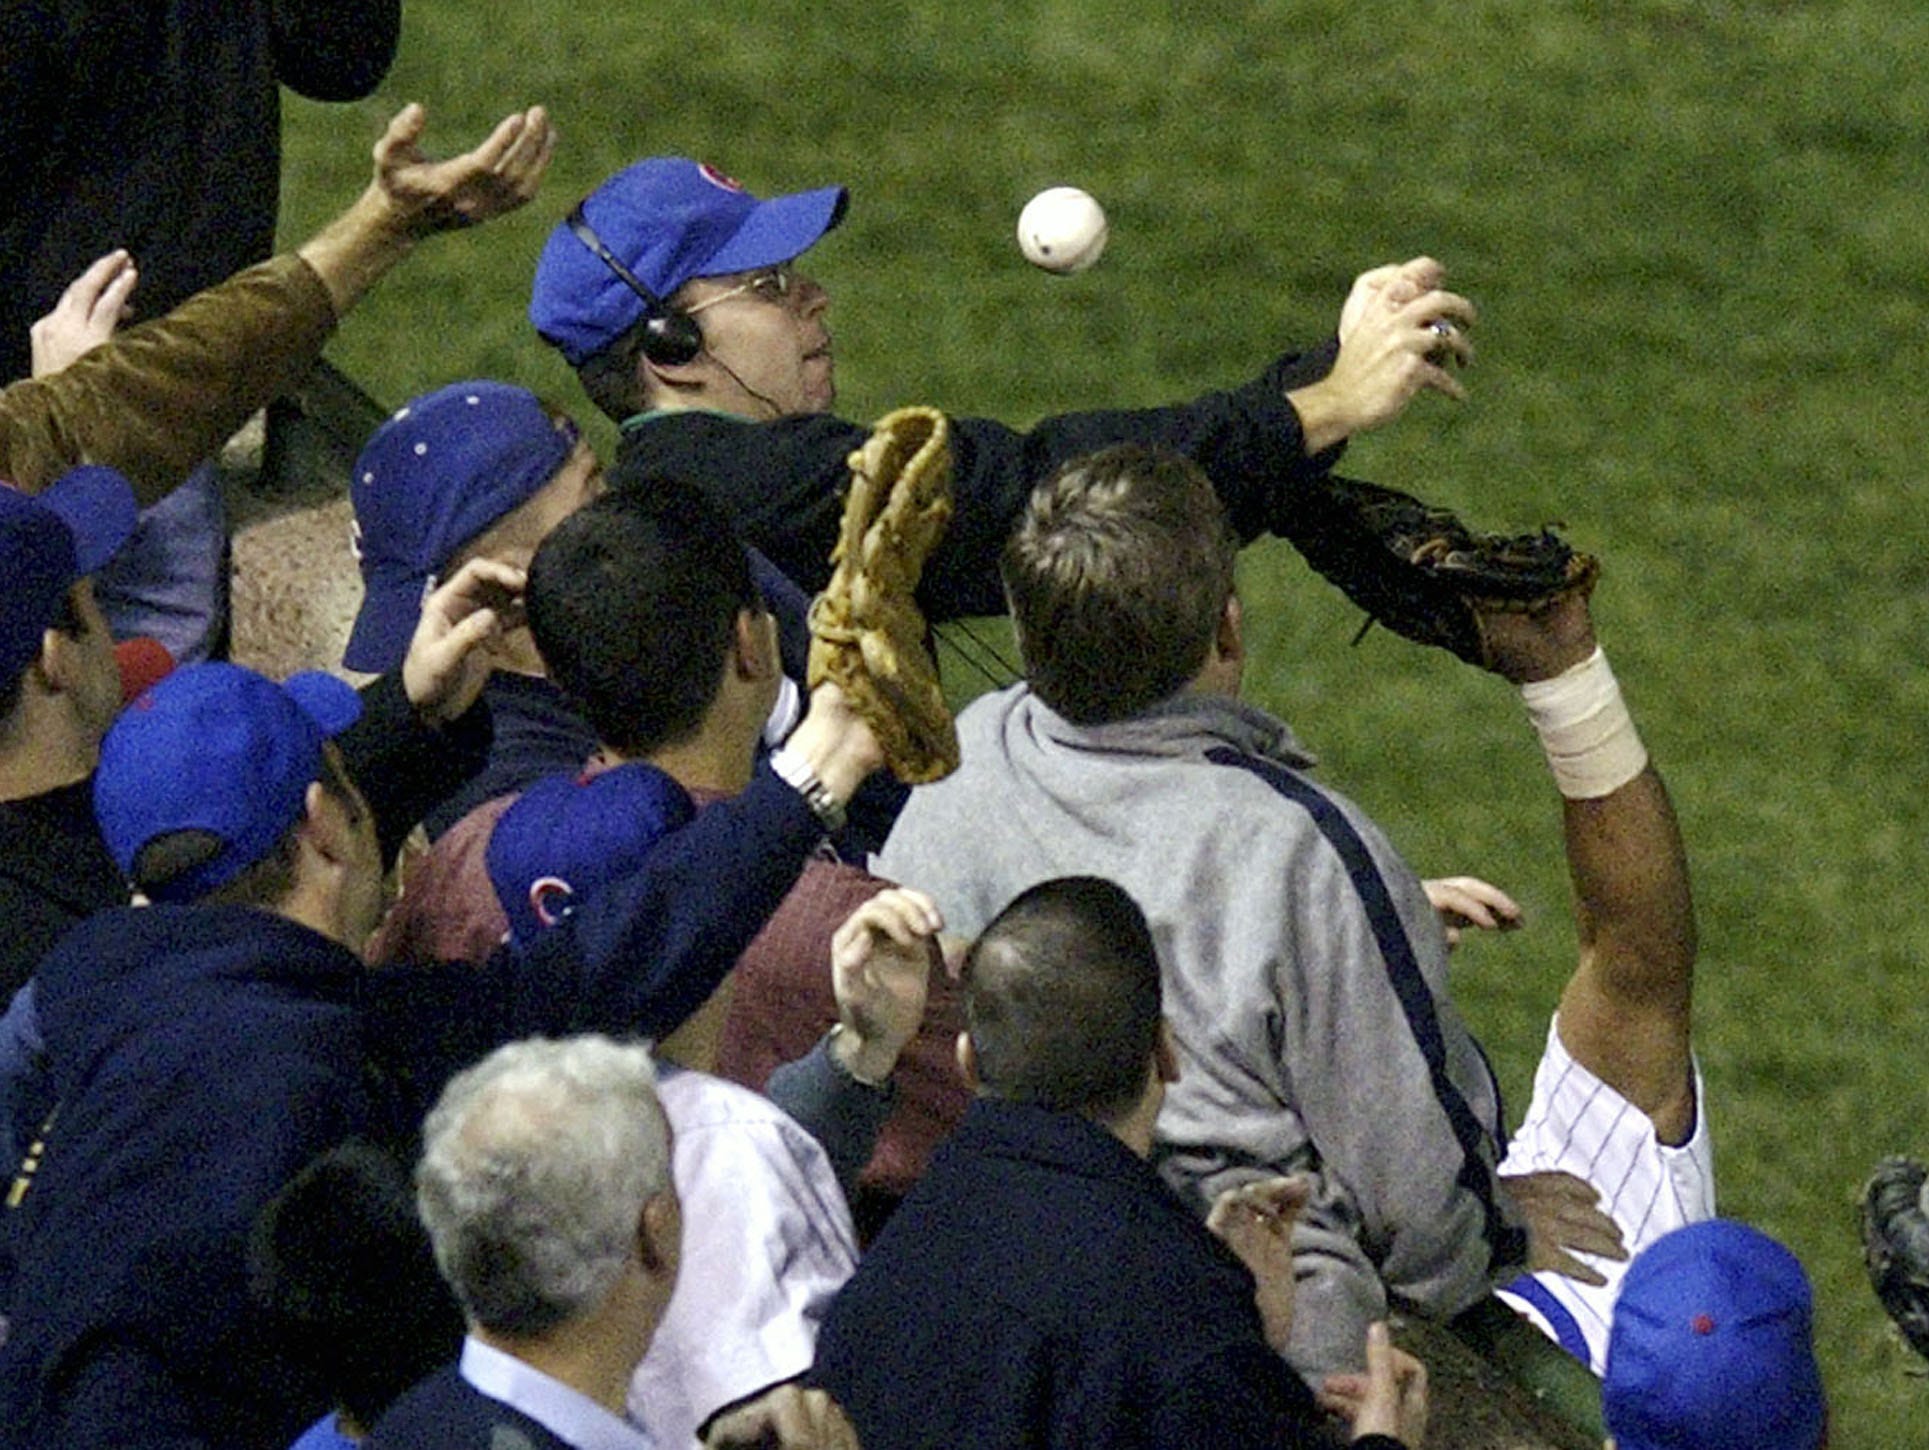 Steve Bartman during the infamous foul ball interference play in the 2003 NLCS.